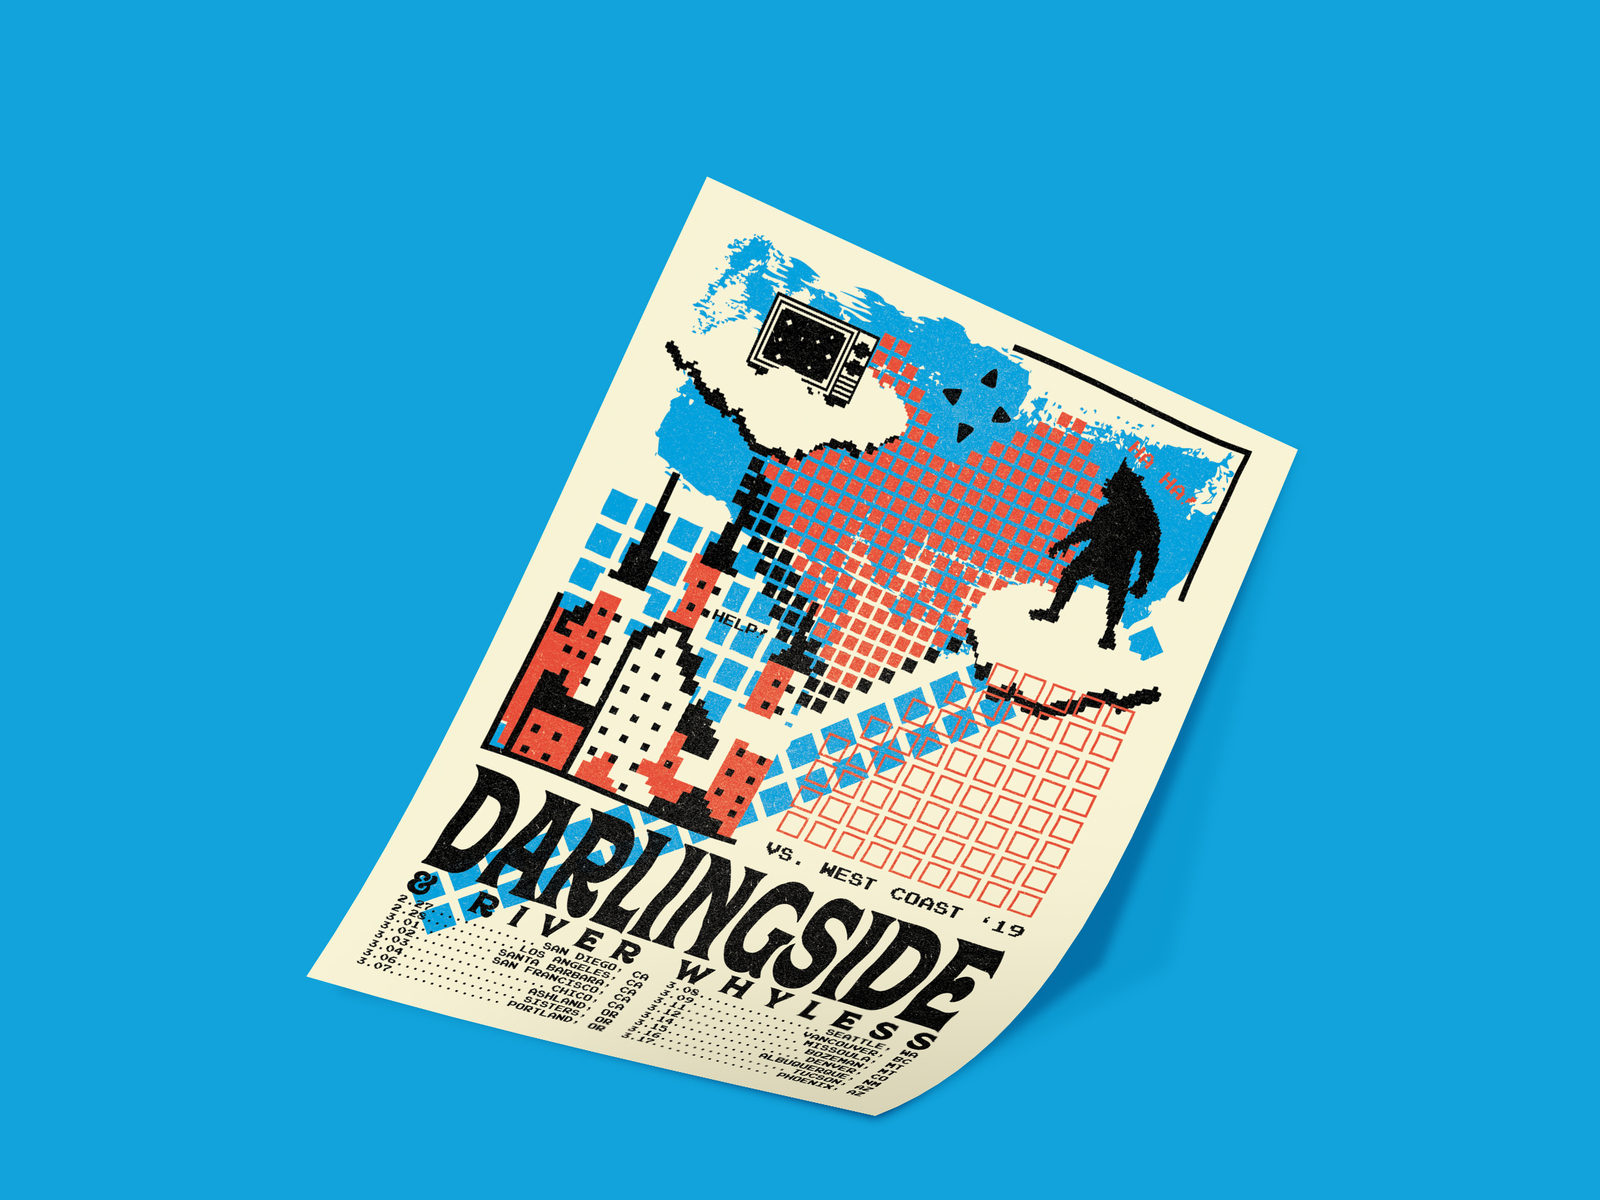 Darlingside Tour Poster by Gregory W. Dyson on Dribbble